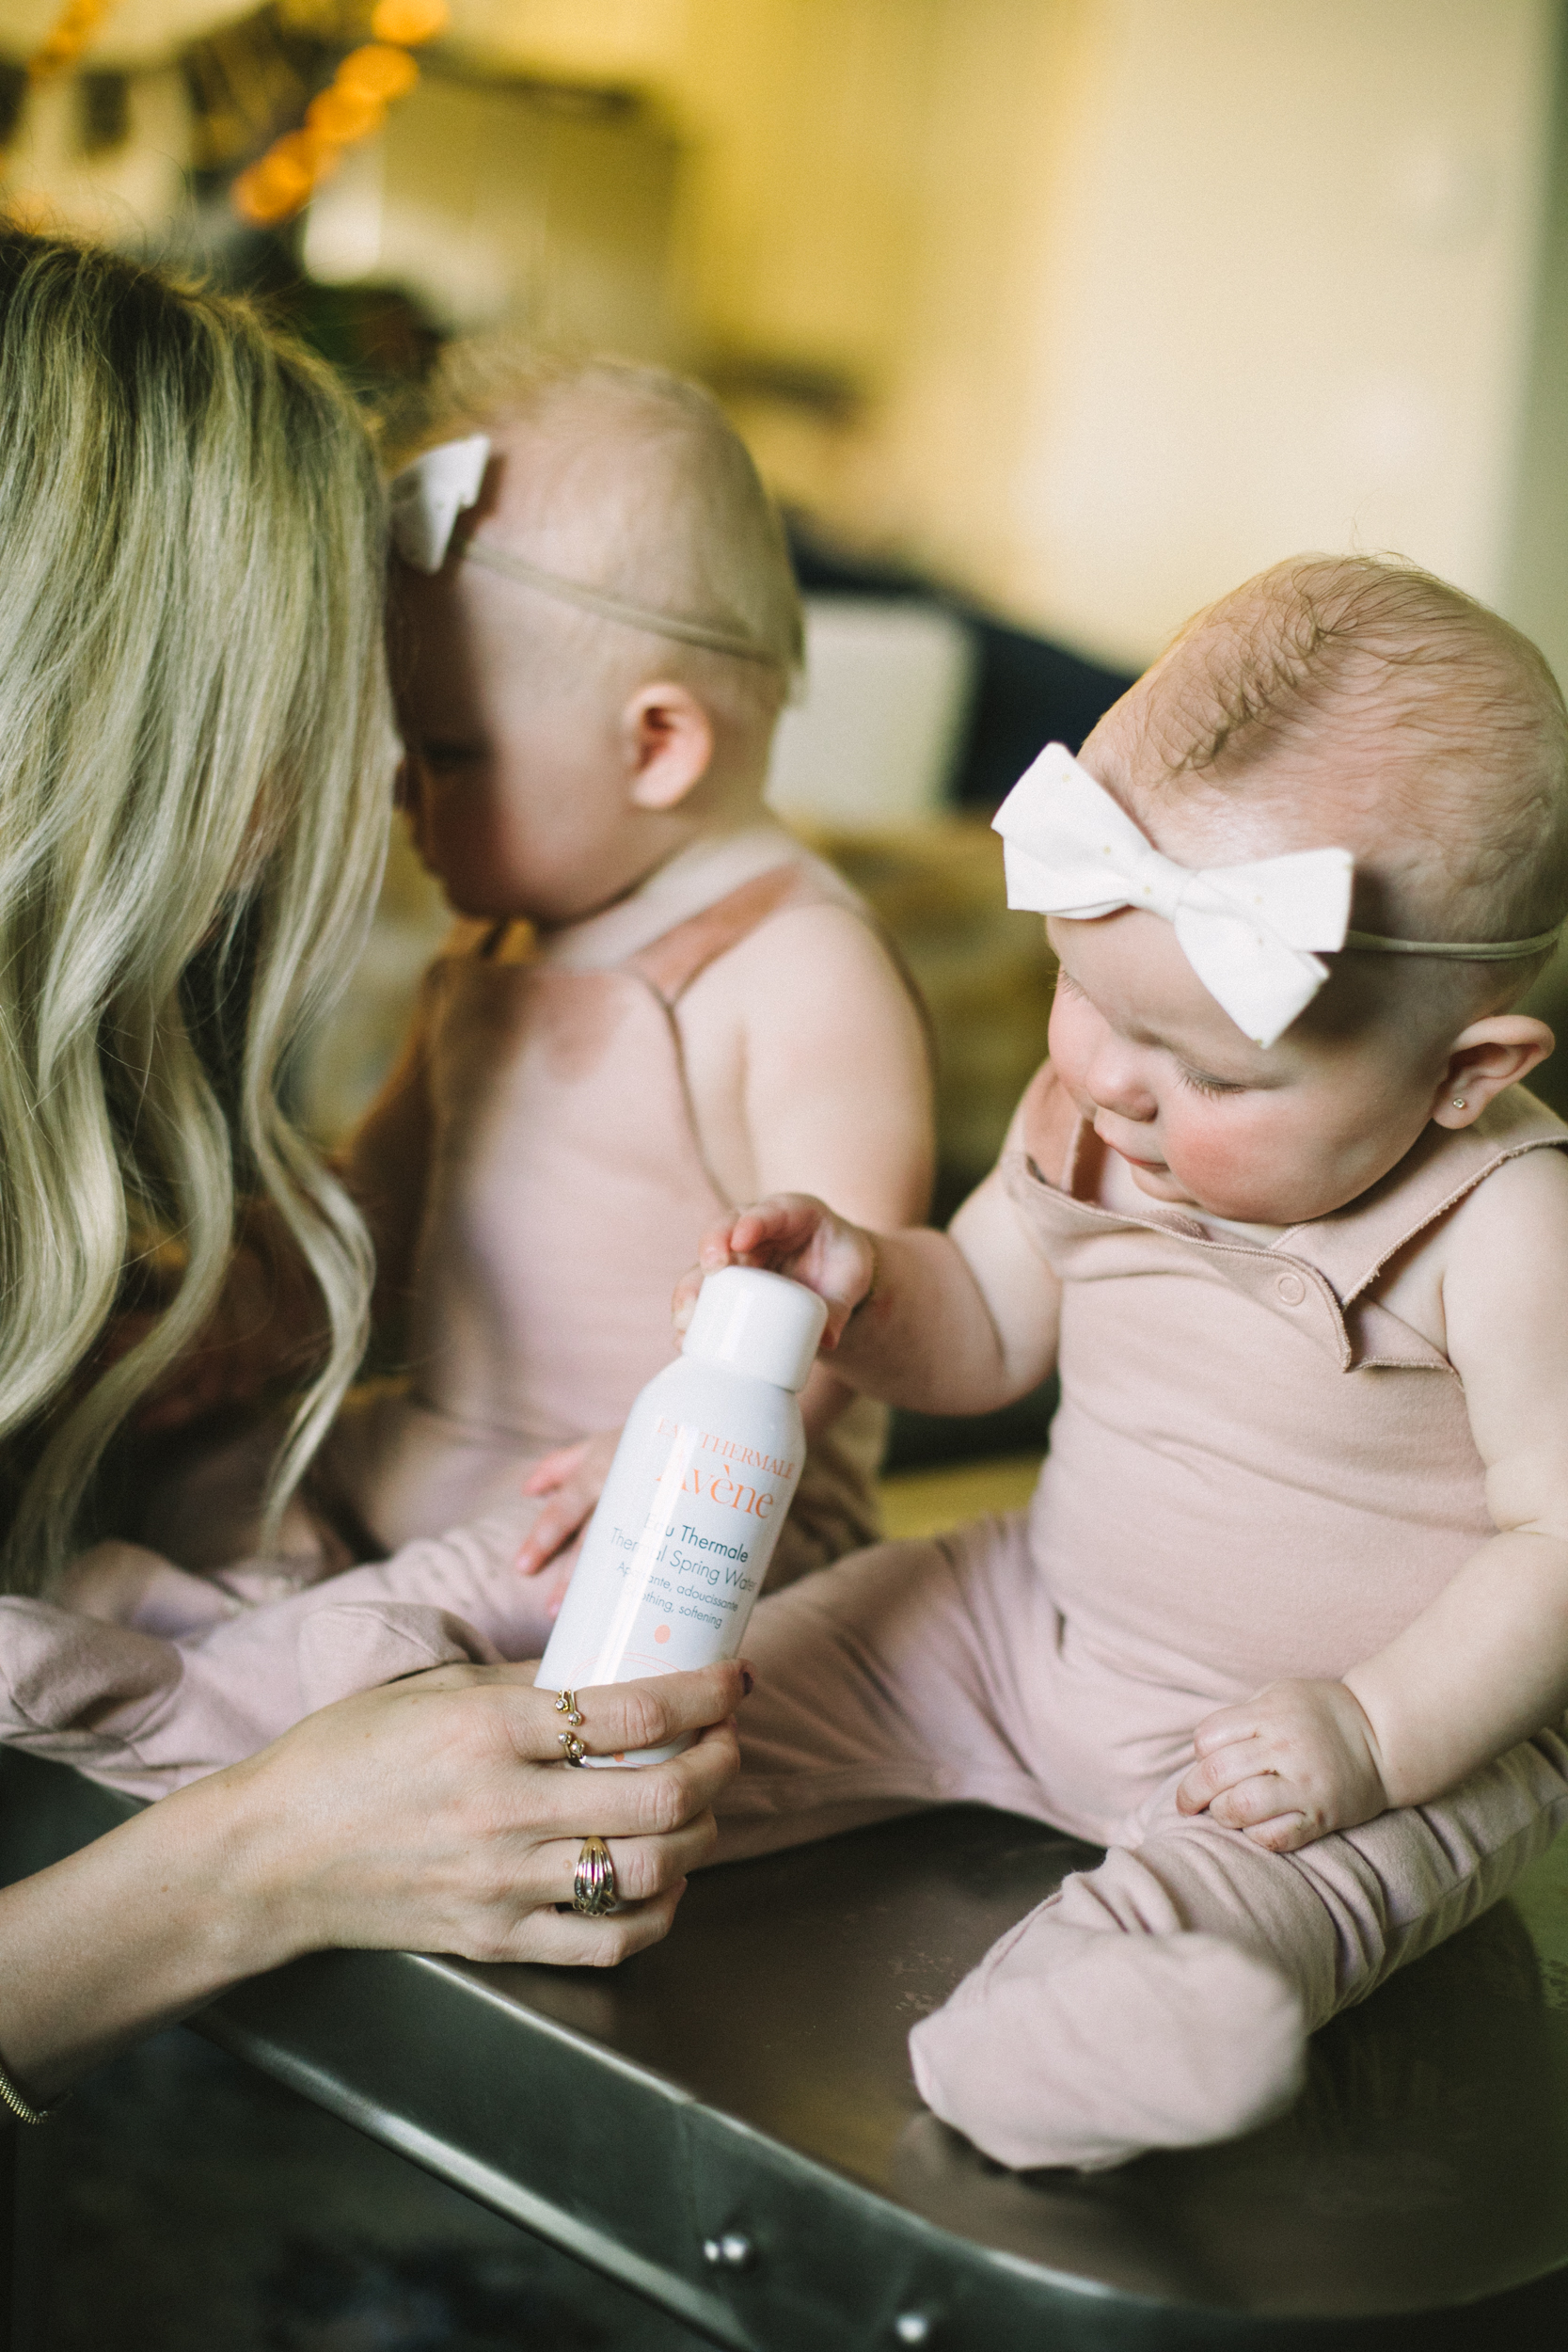 Eau Thermale Avene and Teaching Your Children to be Kind by Las Vegas beauty bloggers Life of a Sister